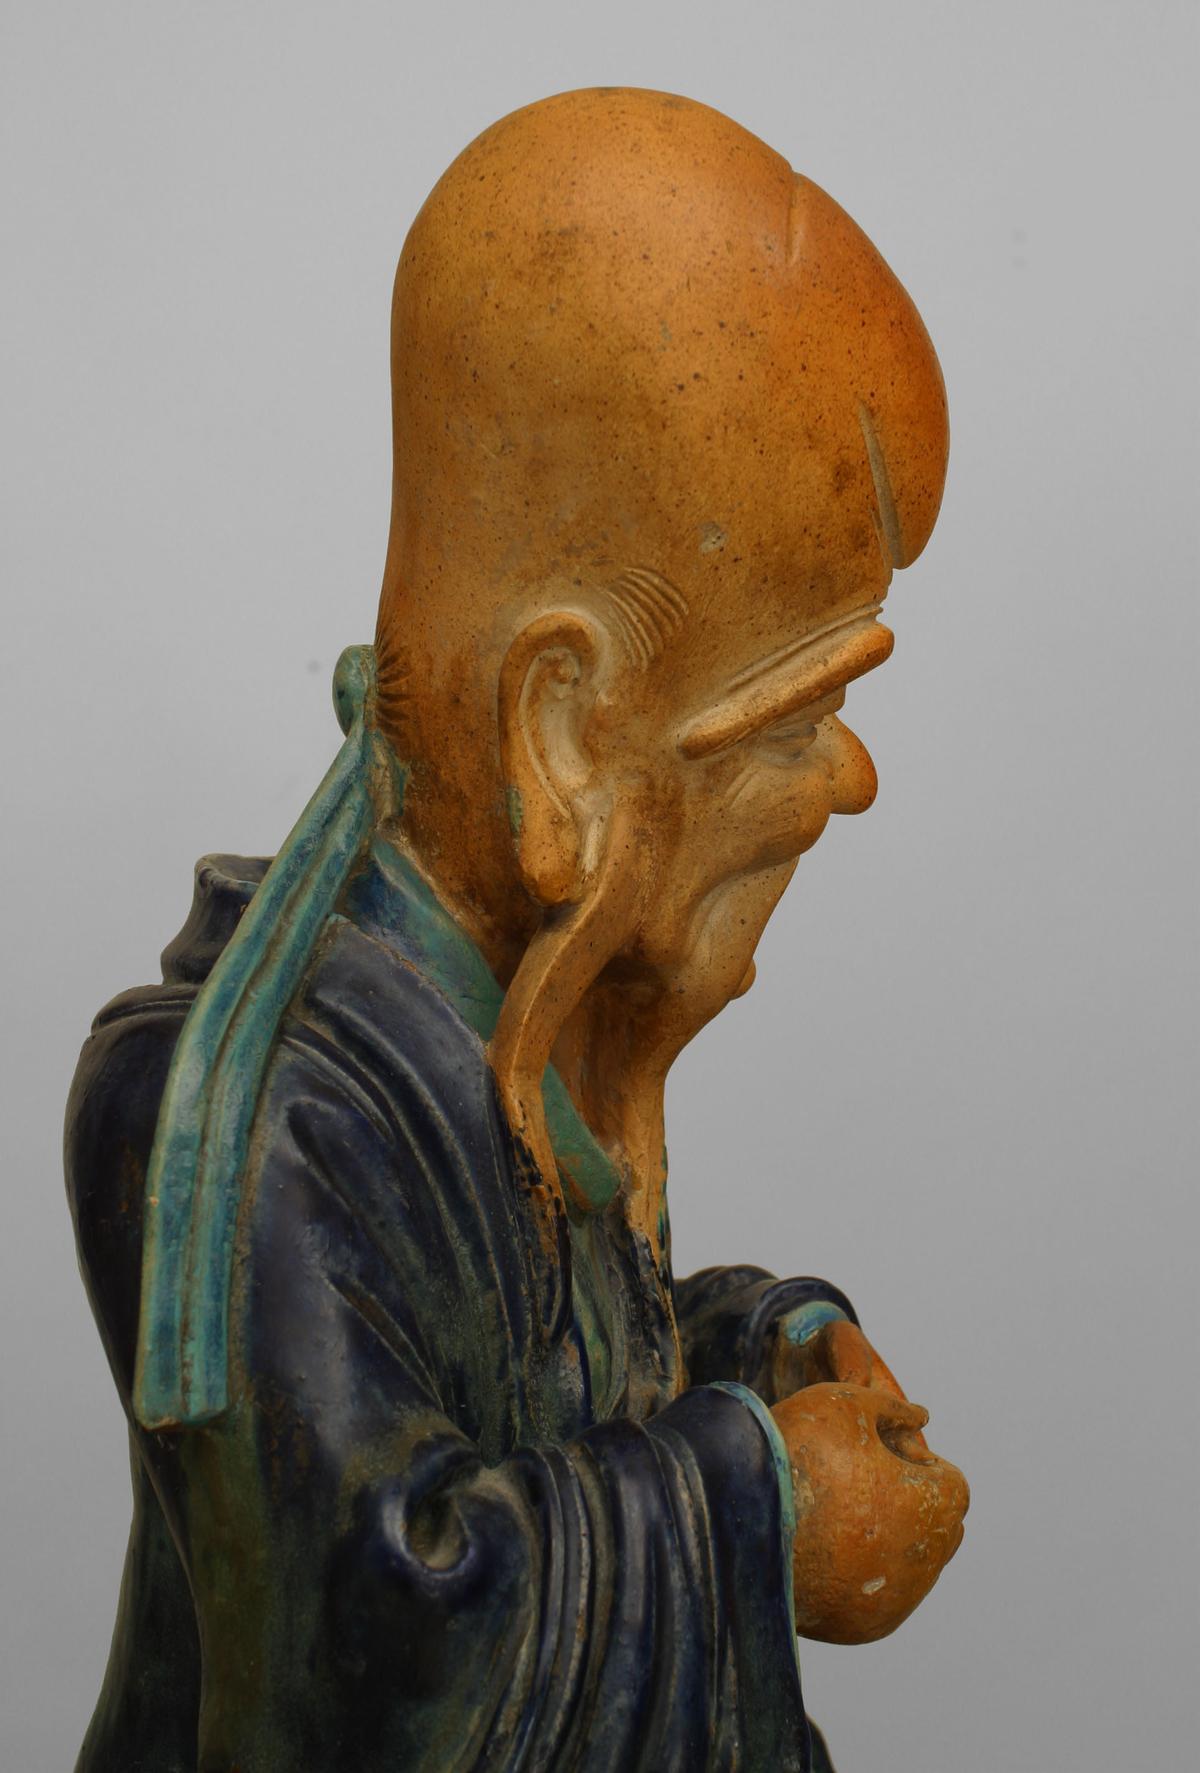 Asian Chinese (Ming Dynasty-Circa 1500) blue & green porcelain Shou Lau seated figure with oversize head (symbolism of longevity & luck) on a base supported with 4 figures.